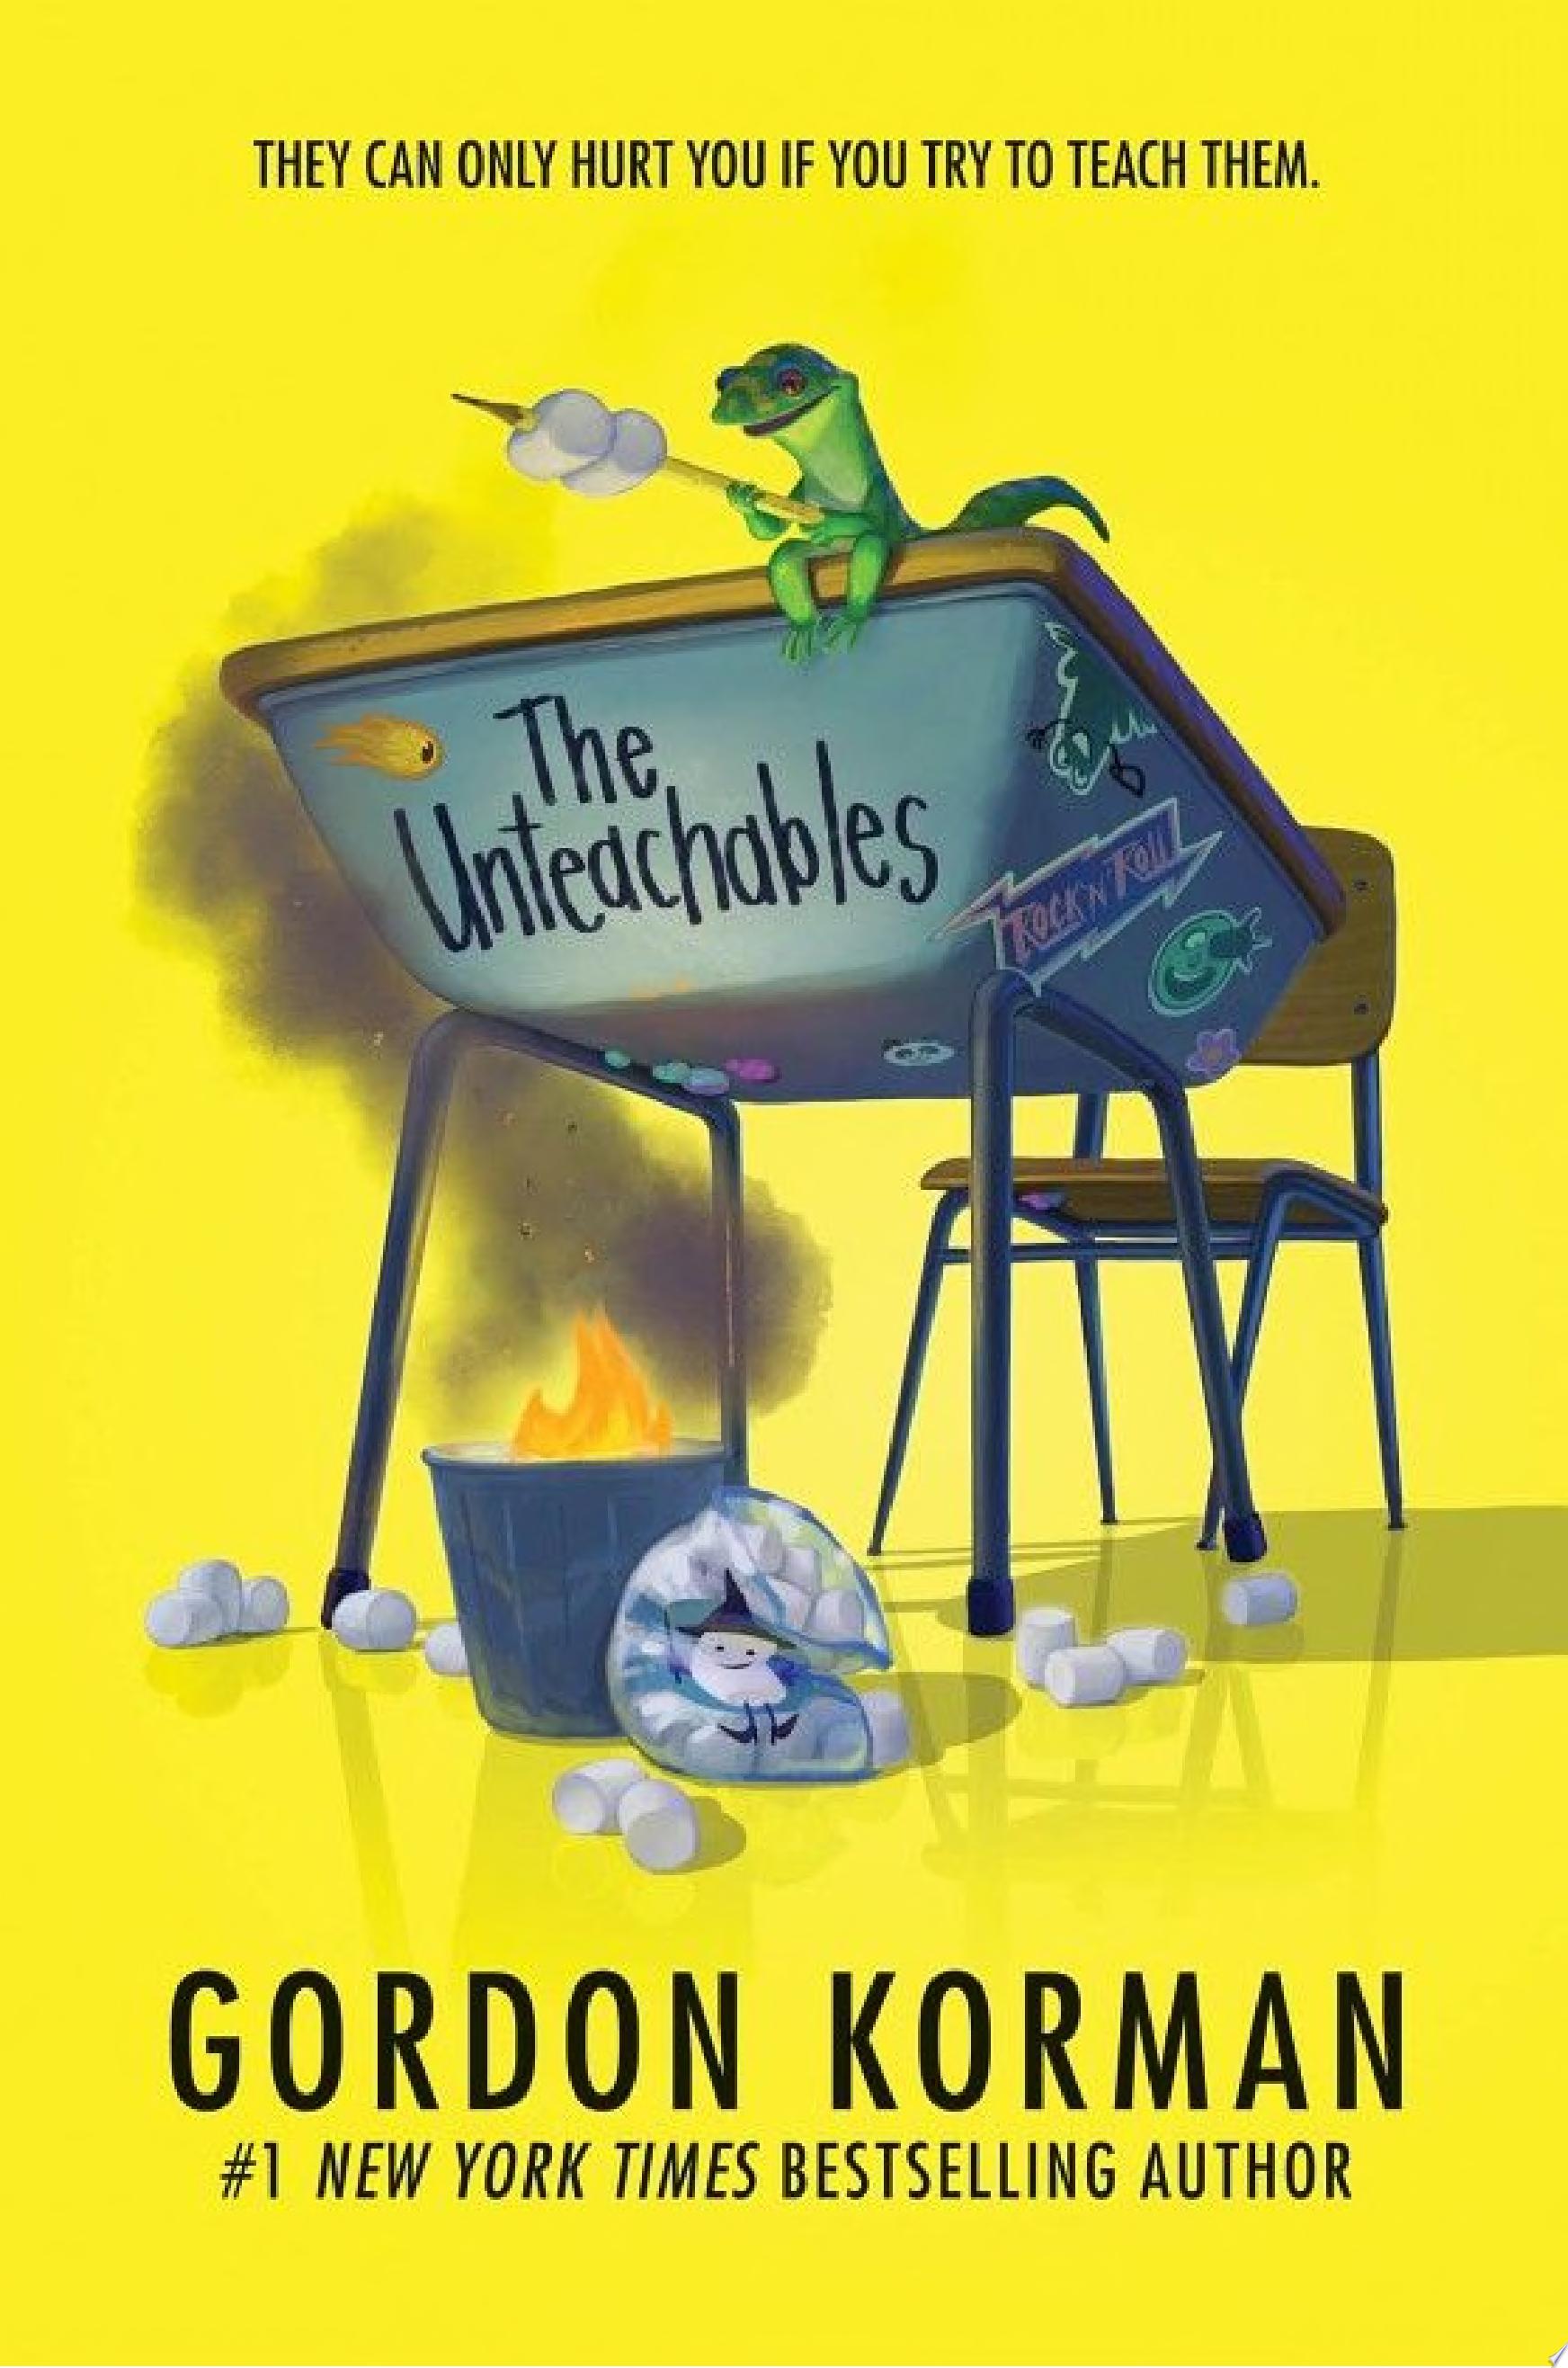 Image for "The Unteachables"